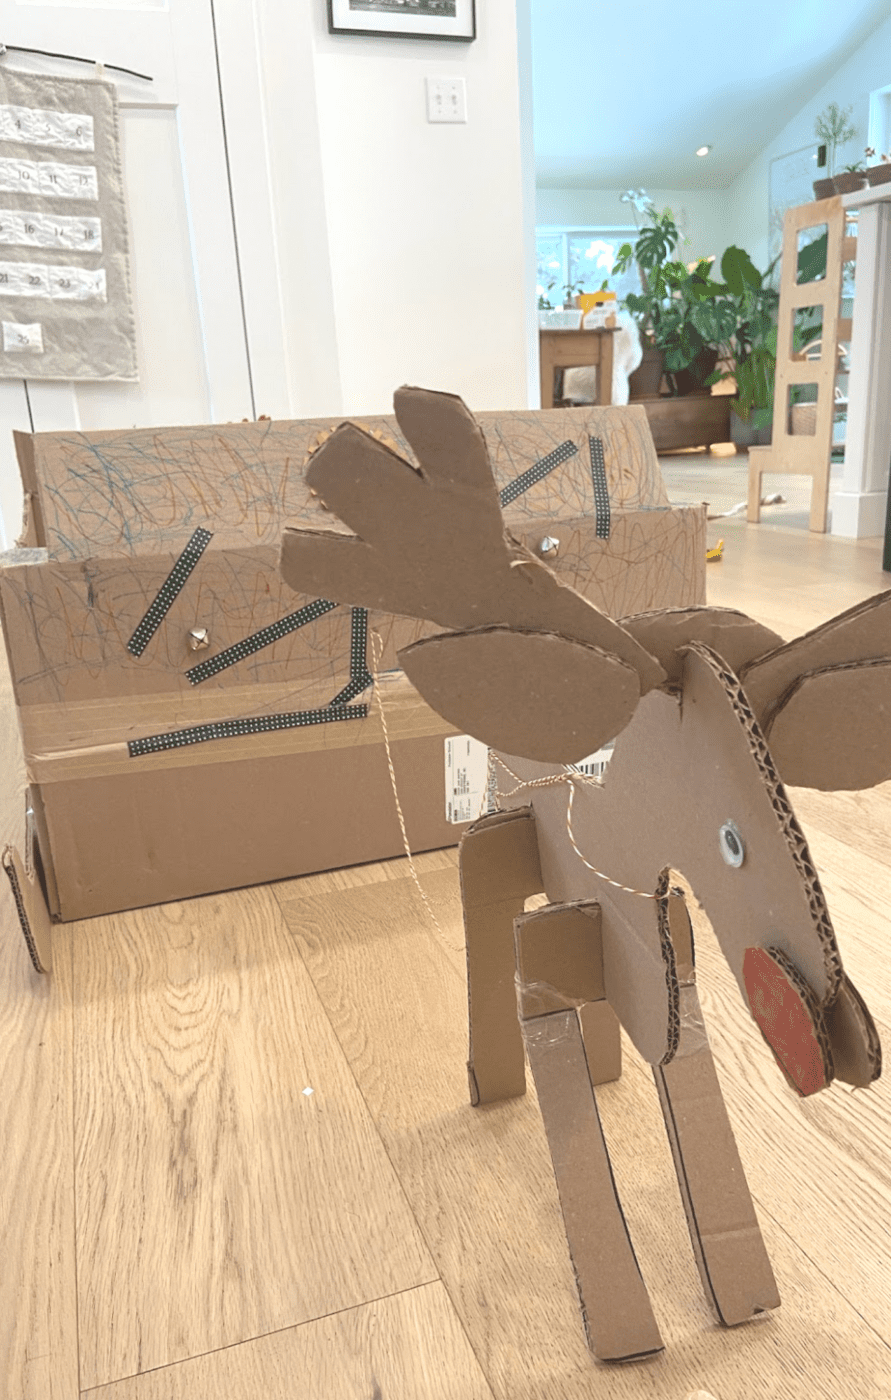 A cardboard reindeer with a googly eye and a red nose and a cardboard sleigh.